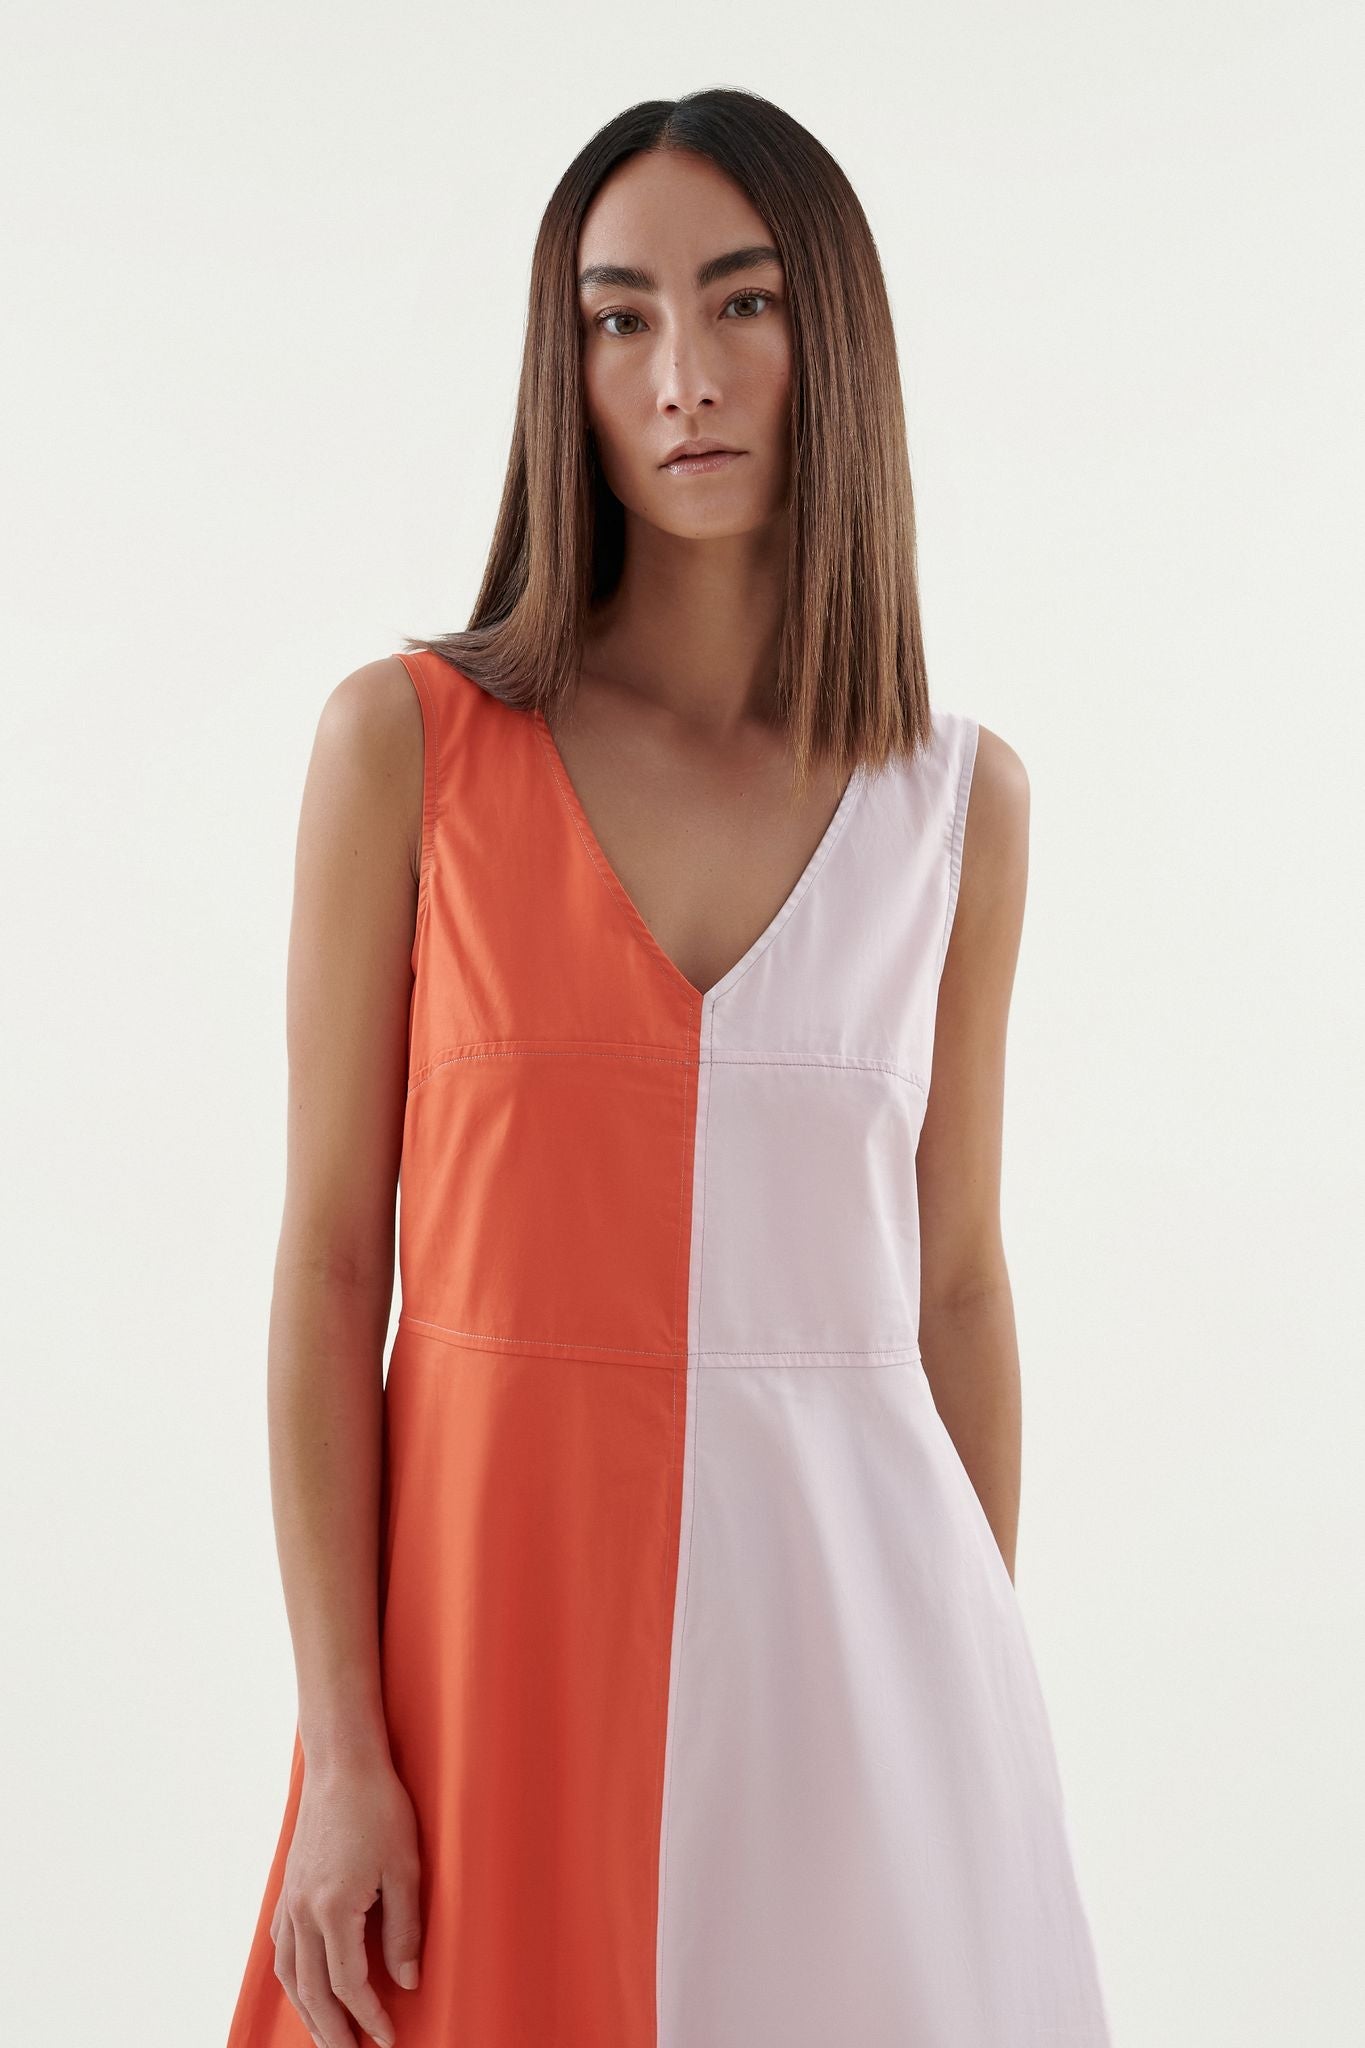 Shop Spliced Tys Dress in Stone/Tangerine/Carnation by Layer'd - Layer'd